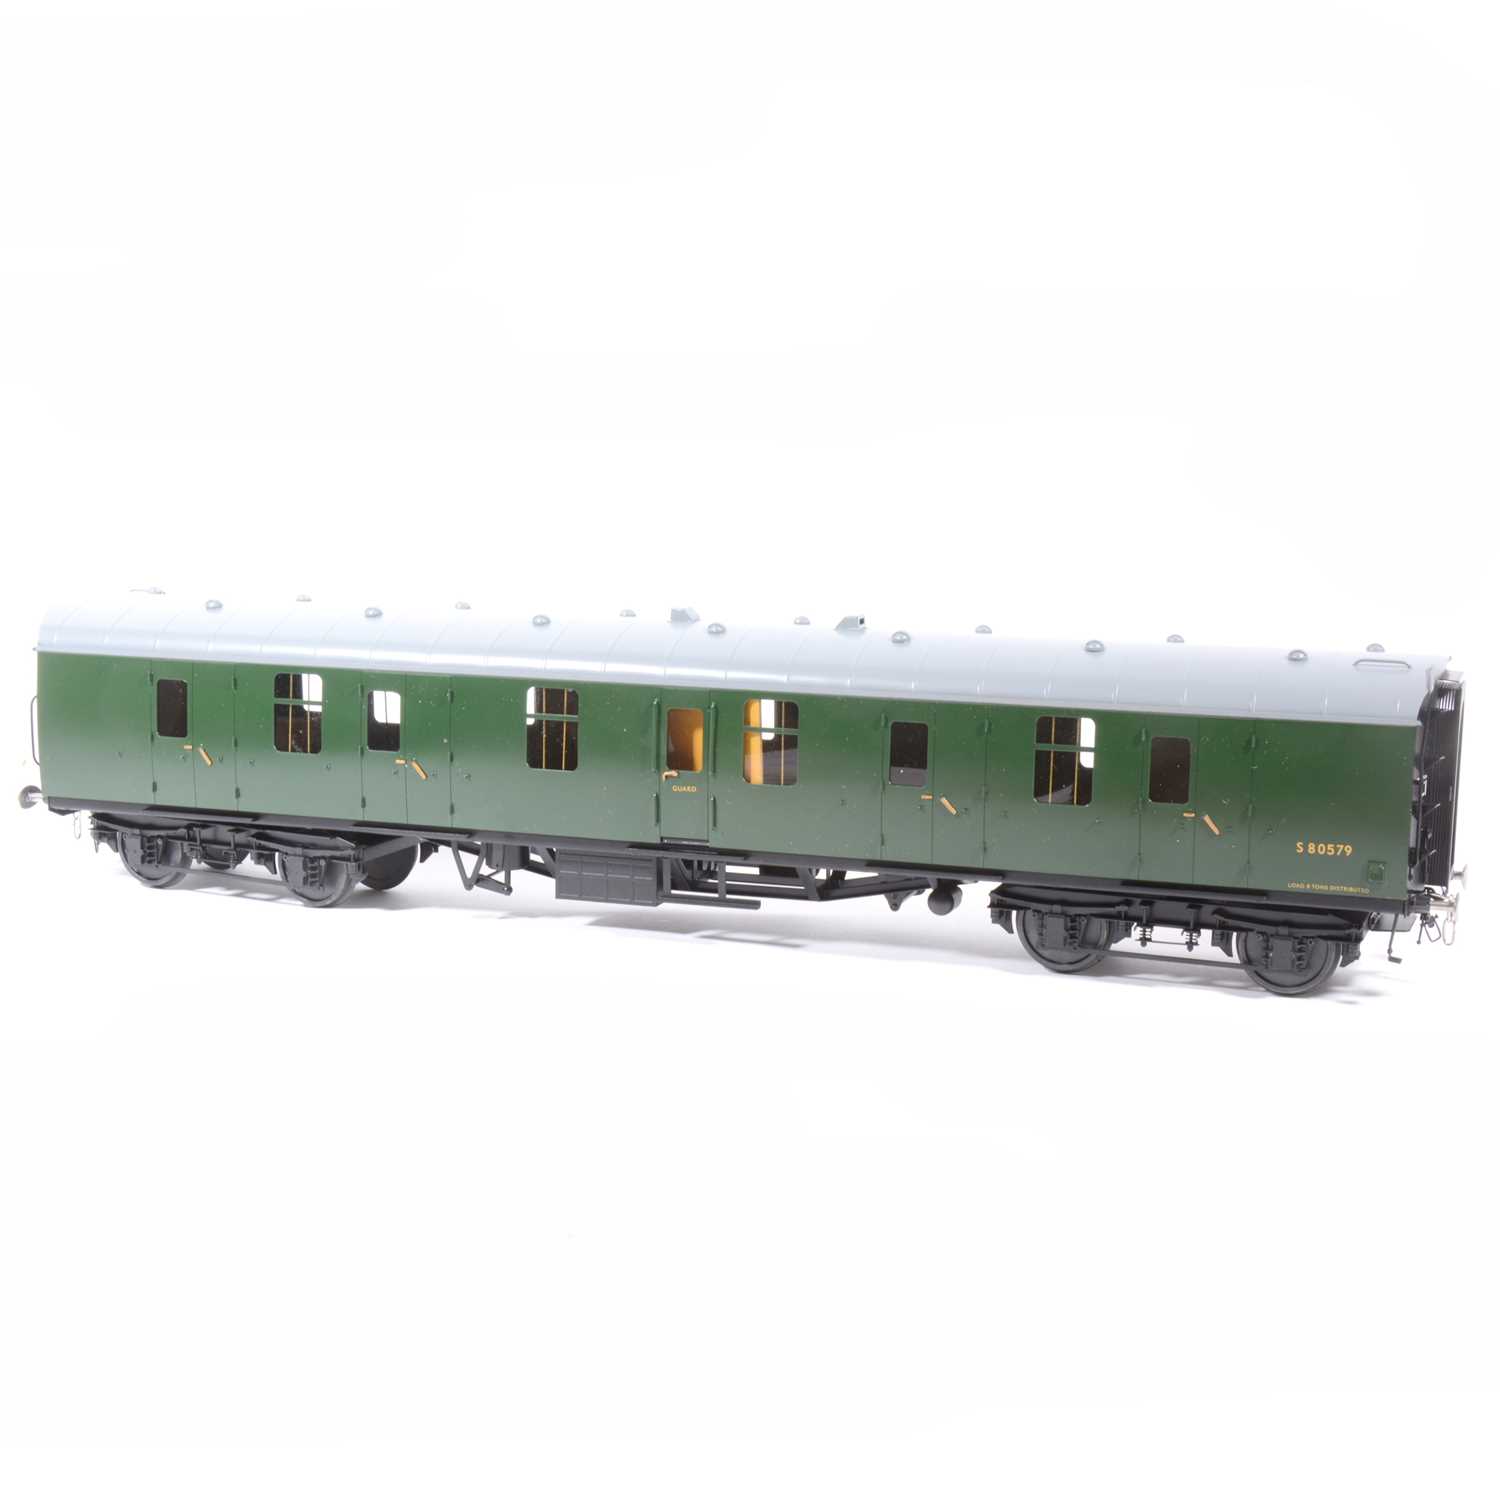 Lot 64 - Tower Brass Models, gauge 1 / G scale, 45mm passenger coach, BR green, no.S80579, boxed.